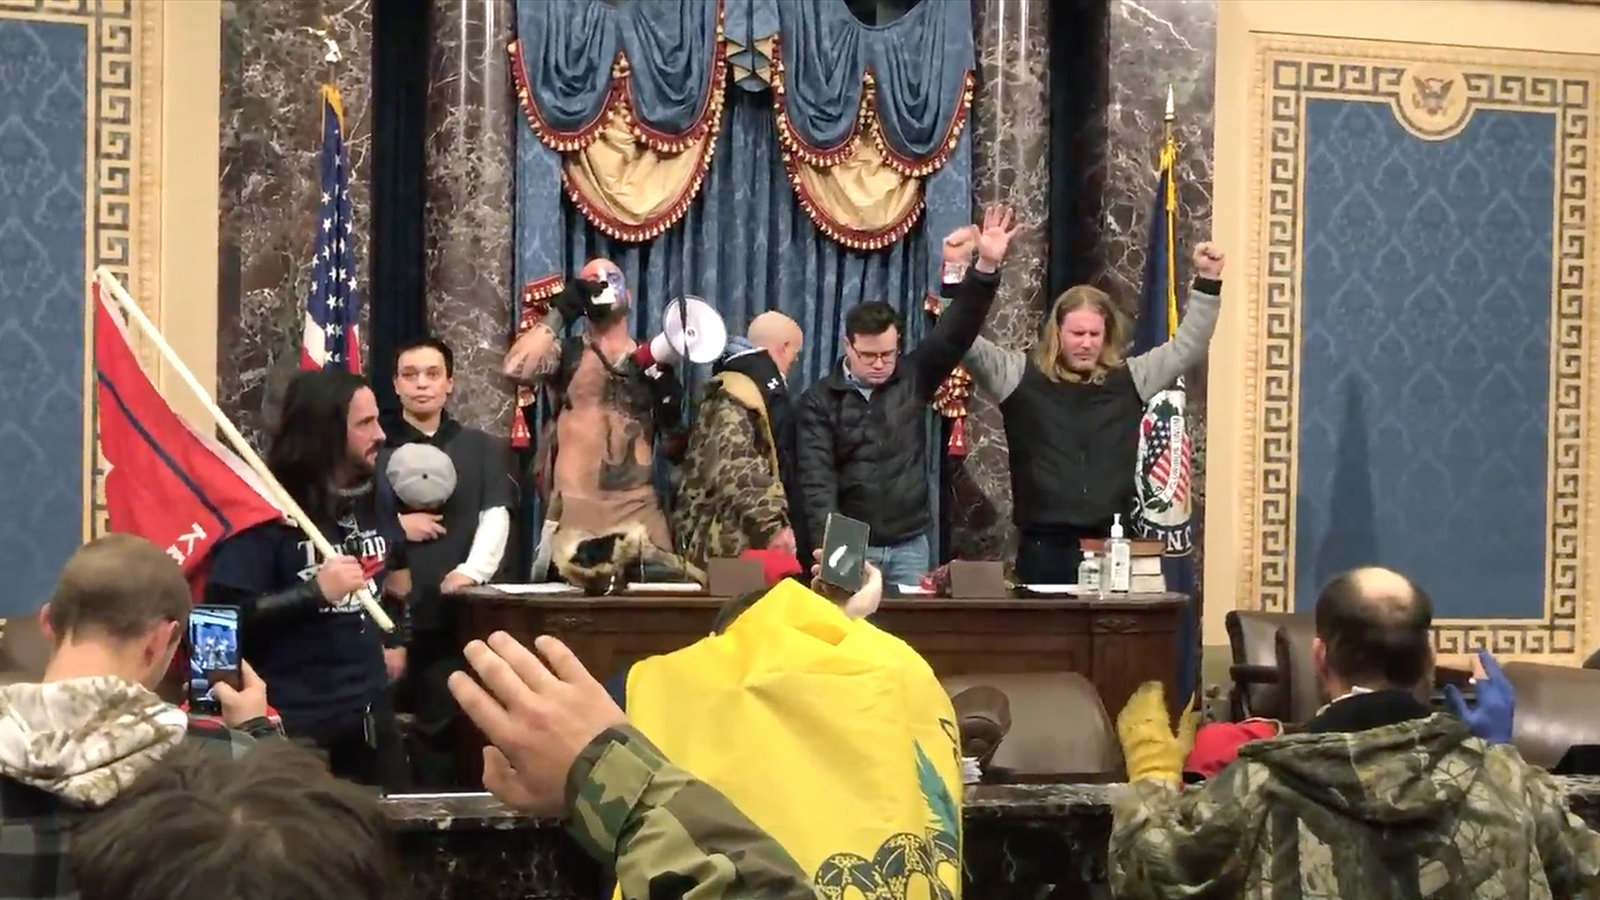 A group of insurrectionists pray inside the U.S. Senate chamber after breaching the Capitol, Jan. 6, 2021, in Washington. Video screengrab via Luke Mogelson/The New Yorker